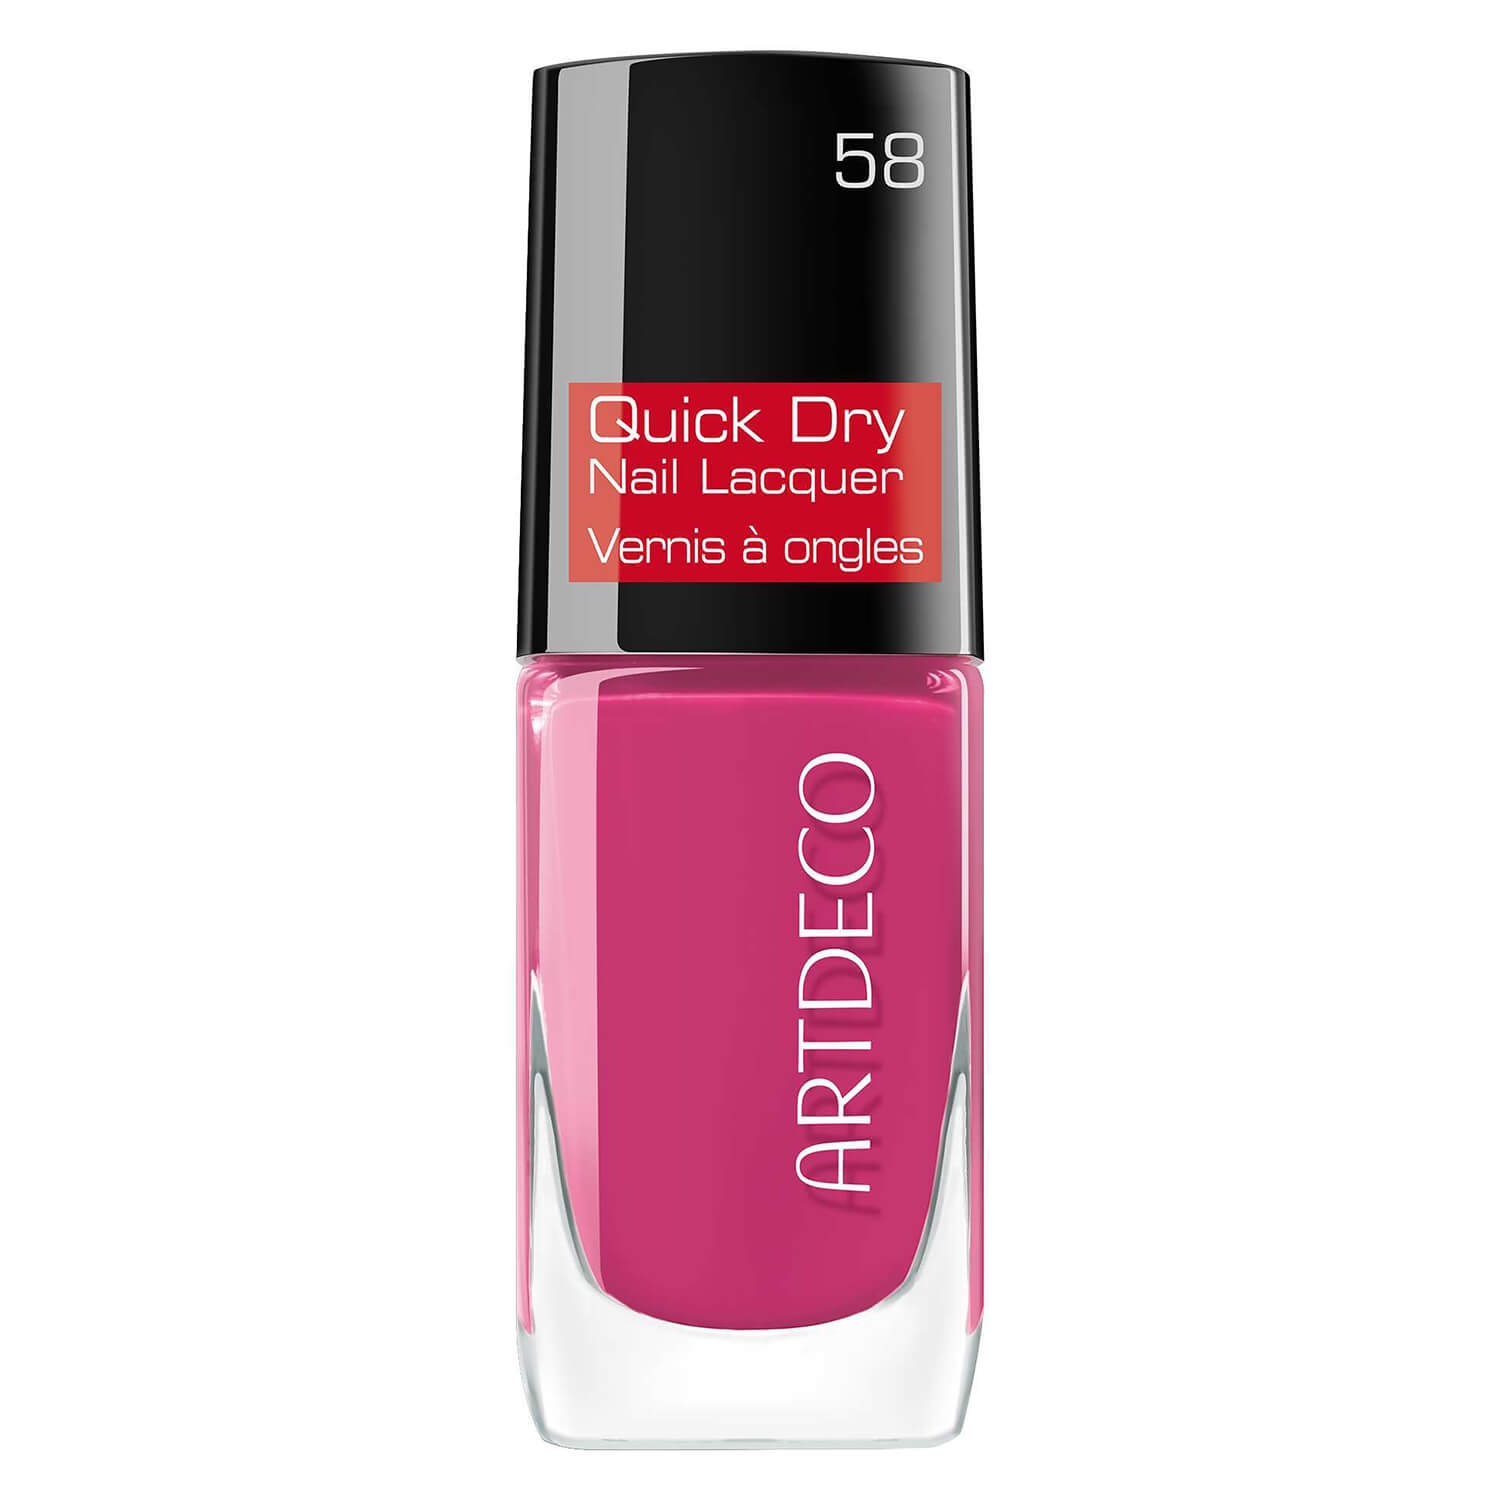 Produktbild von Quick Dry Nail Lacquer Orchid Blossom 58